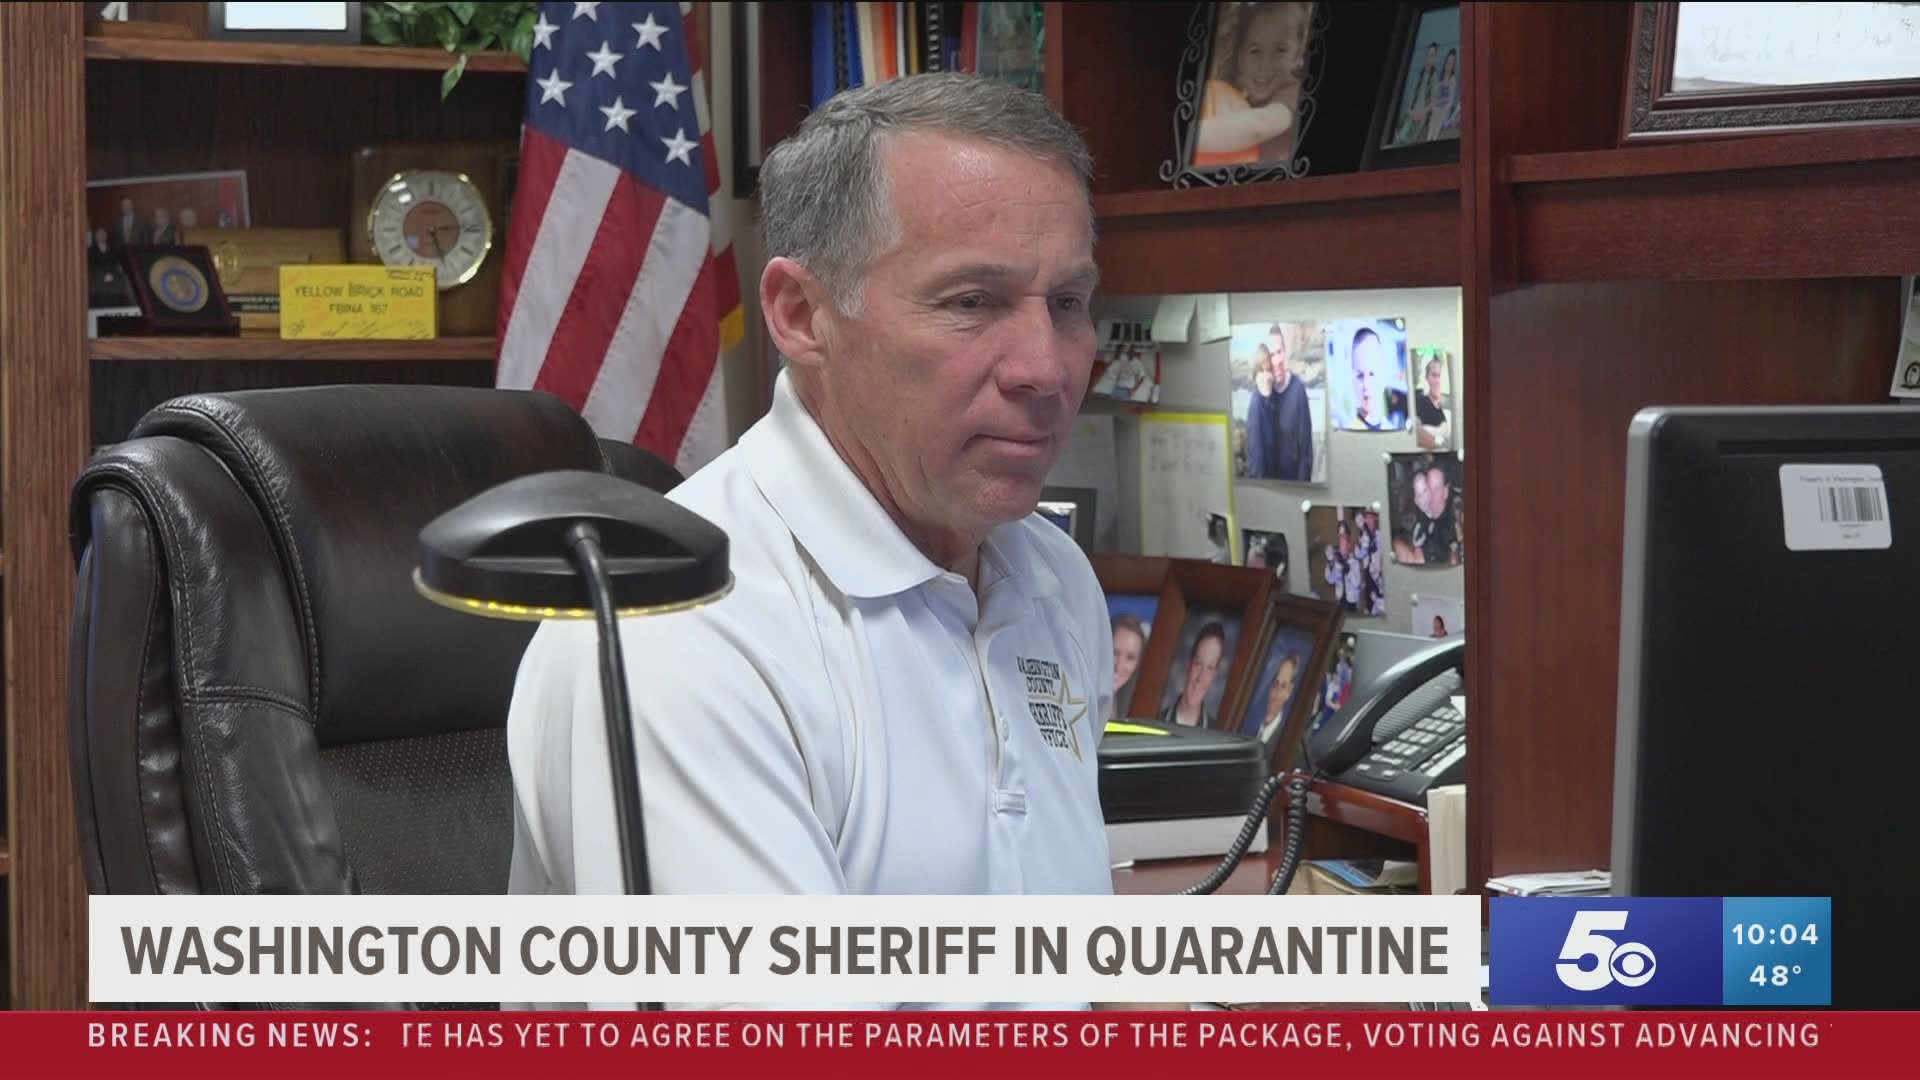 Washington County Sheriff self-quarantines after son tests presumptive positive for COVID-19